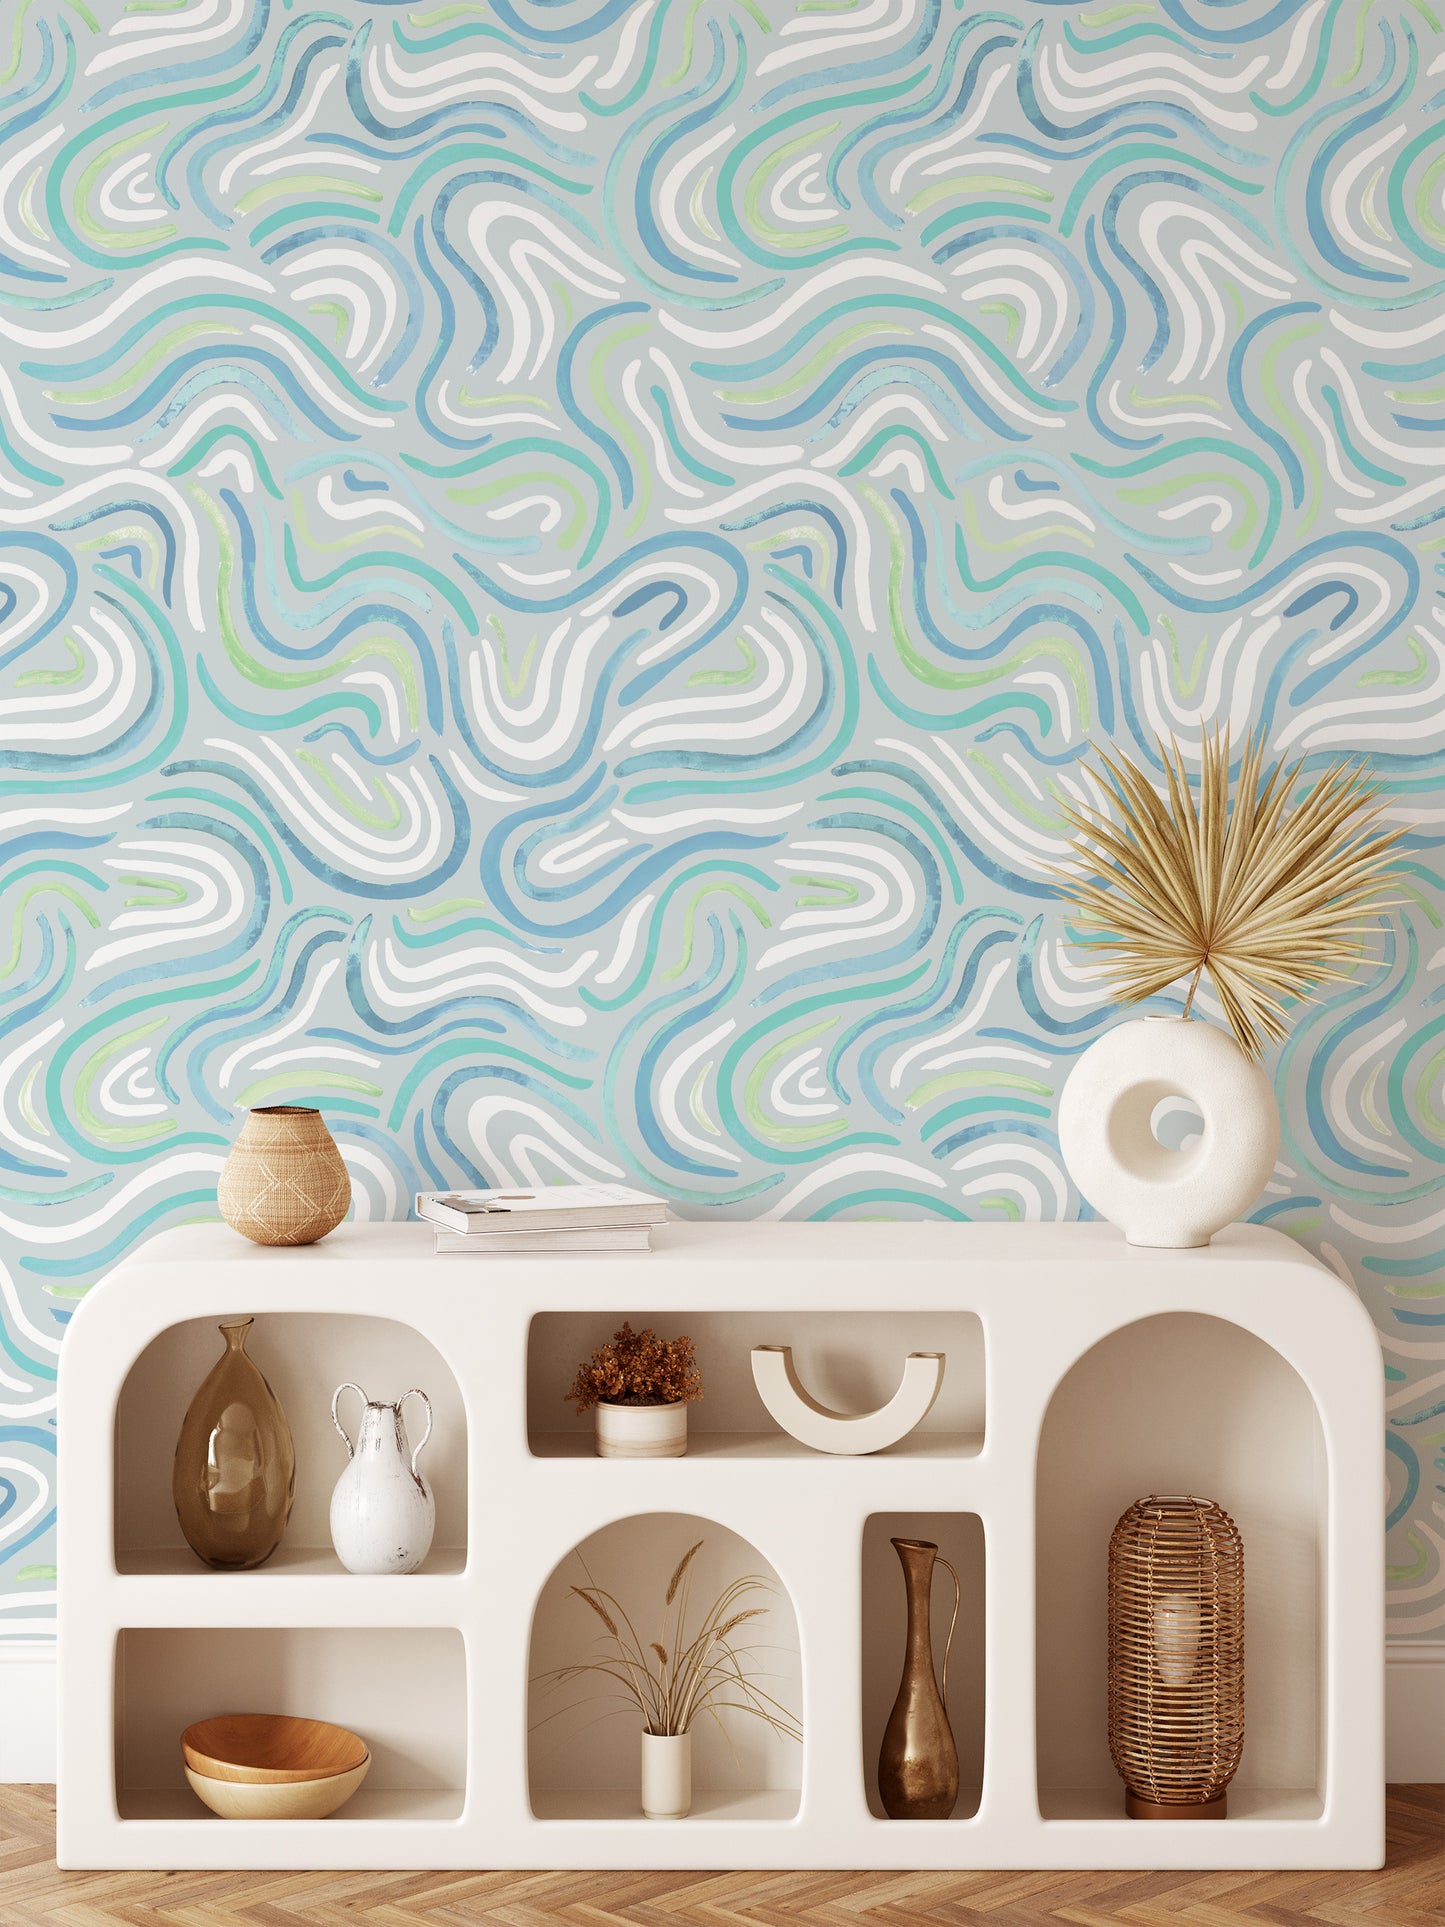 White and Turquoise Nautical Removable Wallpaper 1610 Walls By Me